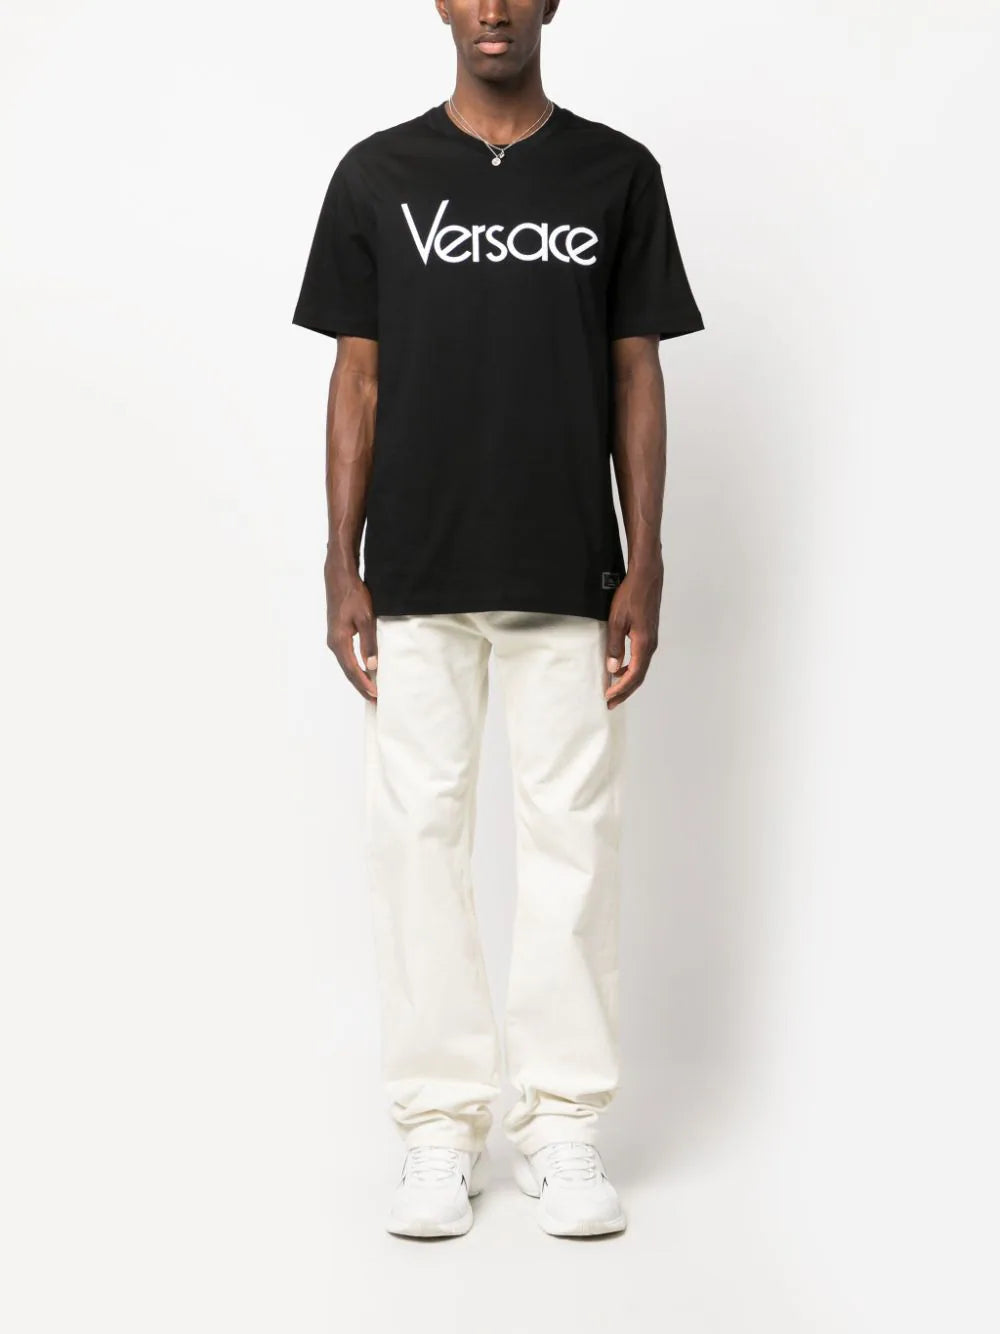 Versace Black Embroidered Tribute T-shirt